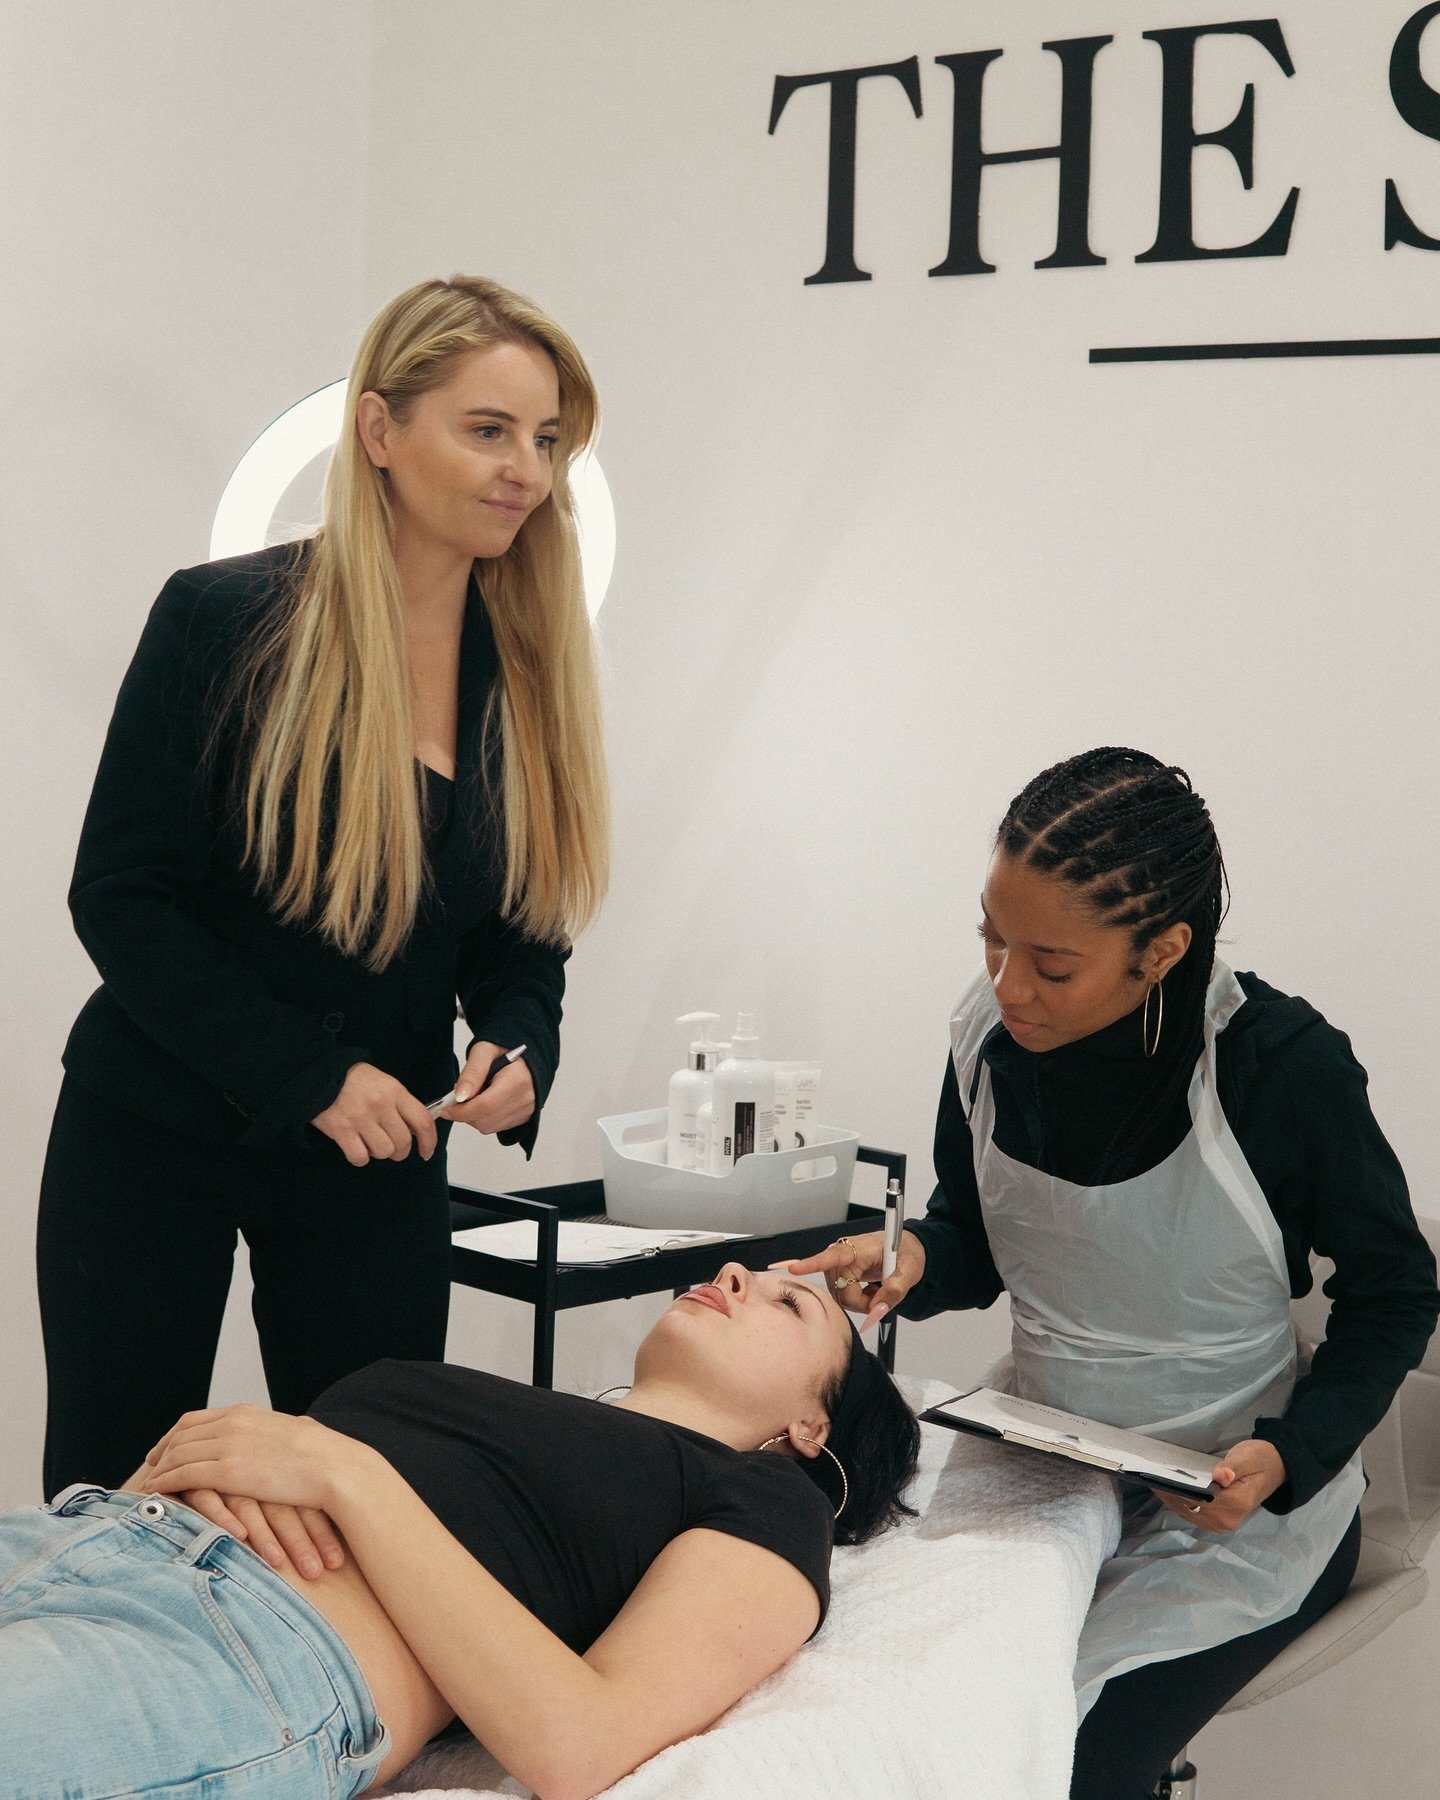 The future depends on what YOU do today✨ change your life and train in skincare 🫶

In just a short time, our graduates become qualified and 𝙨𝙠𝙞𝙡𝙡𝙚𝙙 in a treatment they are passionate about. Confident and ready to make money (and waves) in the